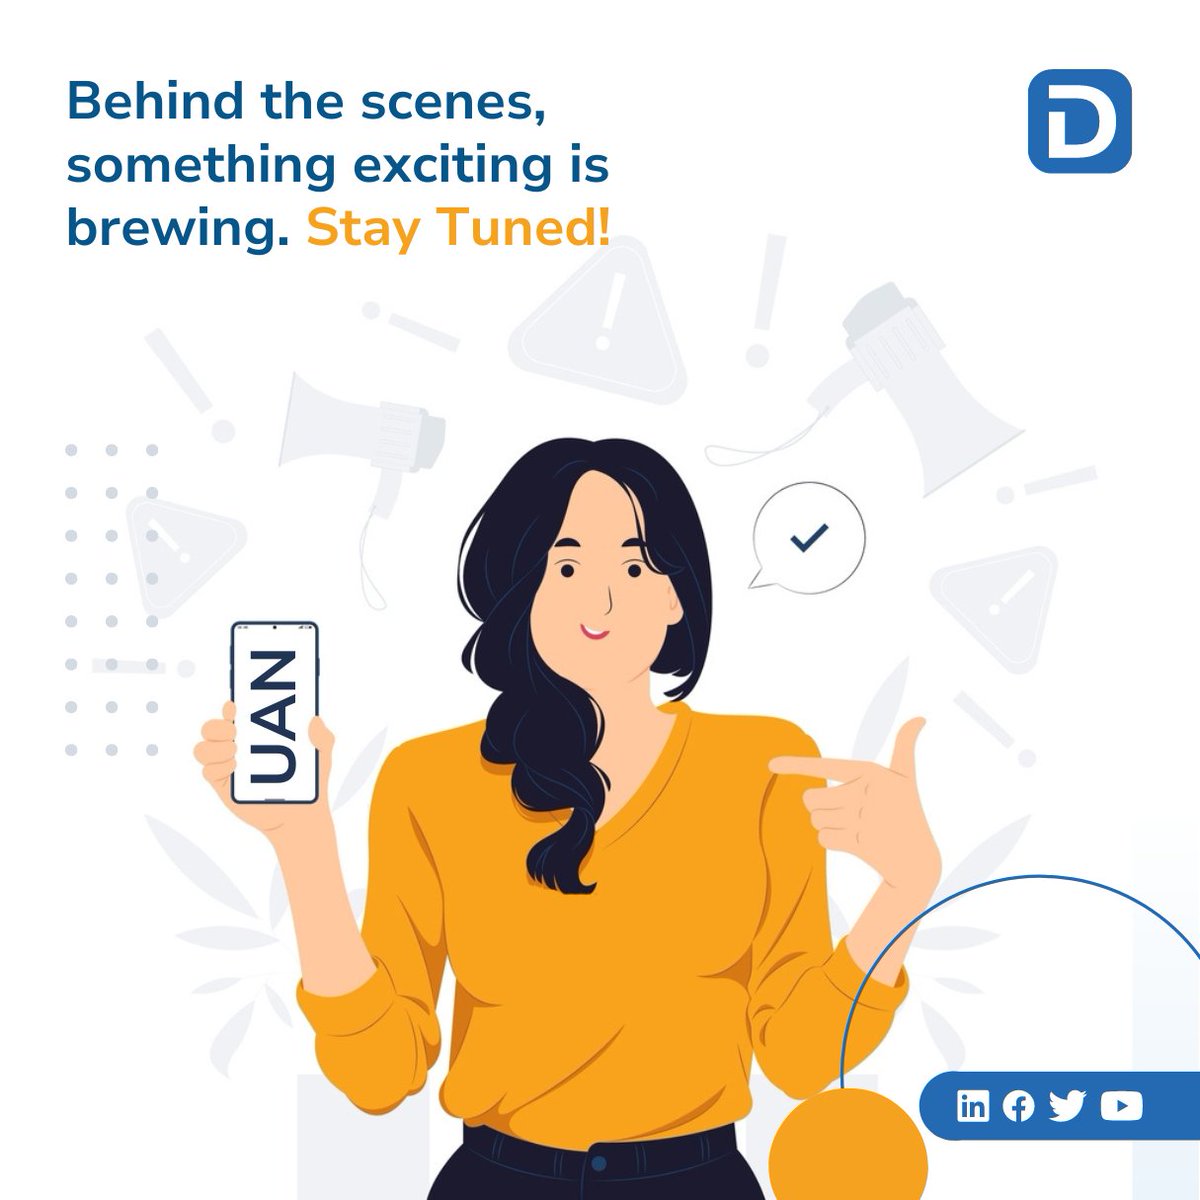 Sneak Peek Alert! Exciting developments are underway behind the scenes... Keep an eye out for an upcoming announcement that will elevate your support experience with added value. #ComingSoon #StayTuned